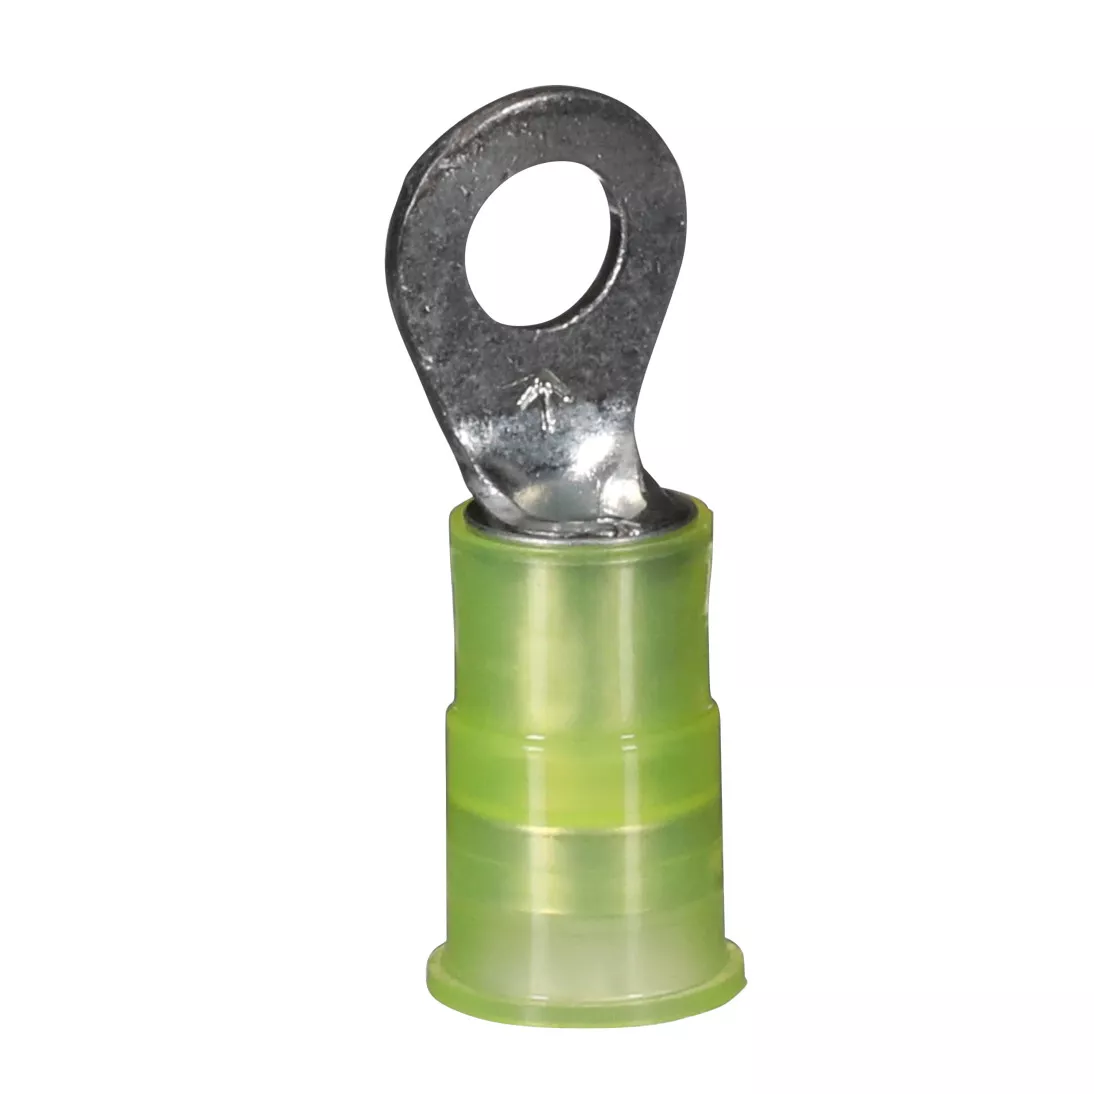 3M™ Scotchlok™ Ring Nylon Insulated, 50/bottle, MNG10-10RX,
standard-style ring tongue fits around the stud, 500/Case